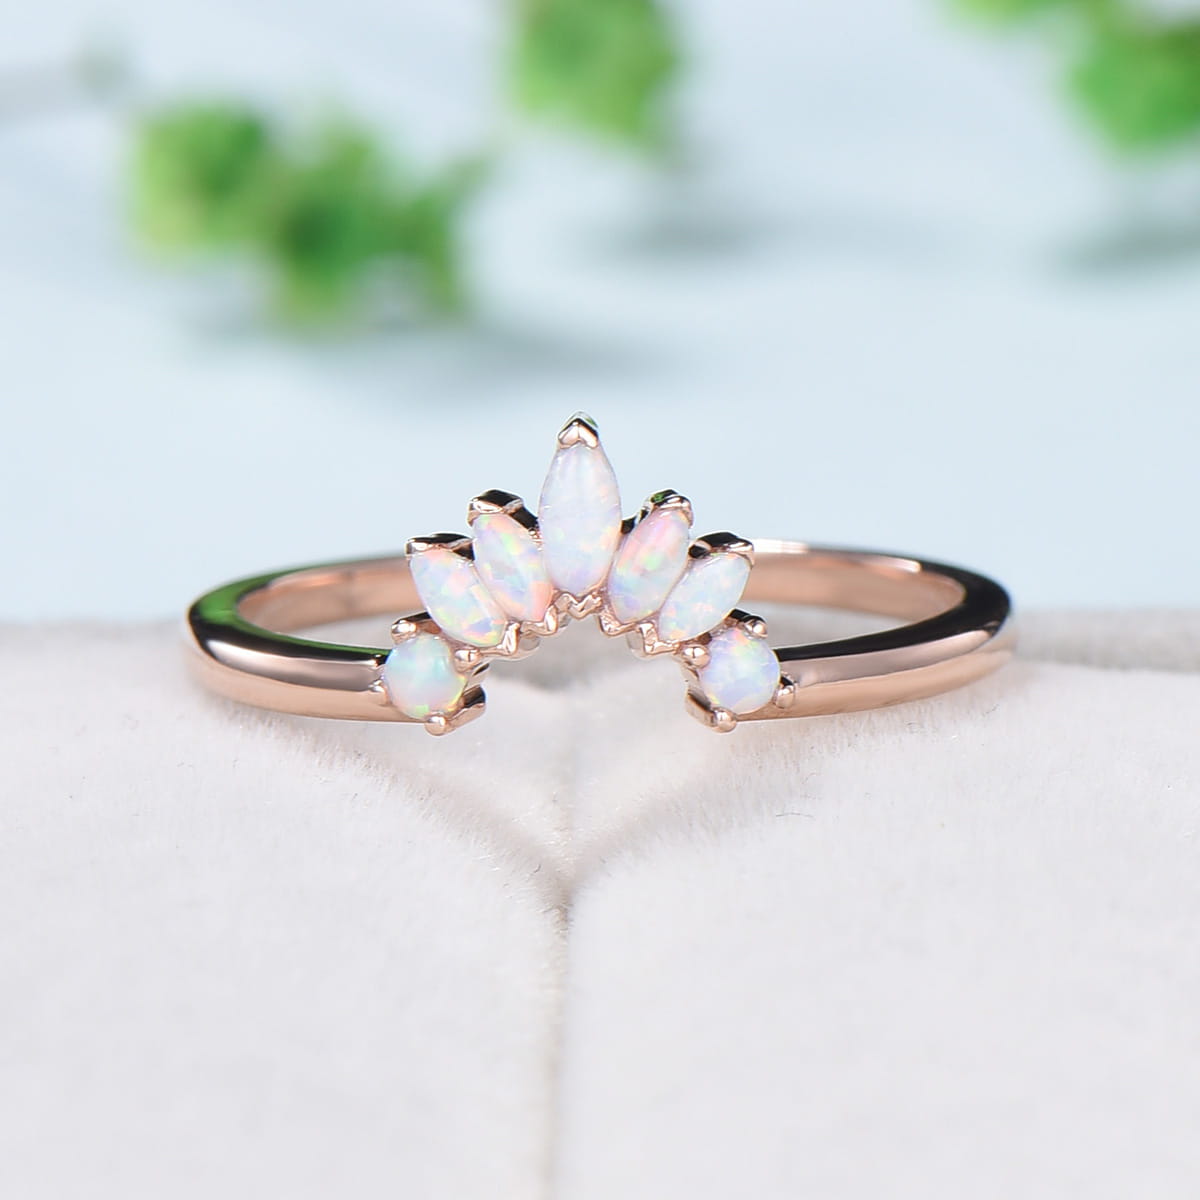 Vintage White Opal Wedding Ring Curved V Marquise Cut Fire Opal Wedding Band For Women Rose Gold Opal Stacking Art Deco Anniversary Ring - PENFINE